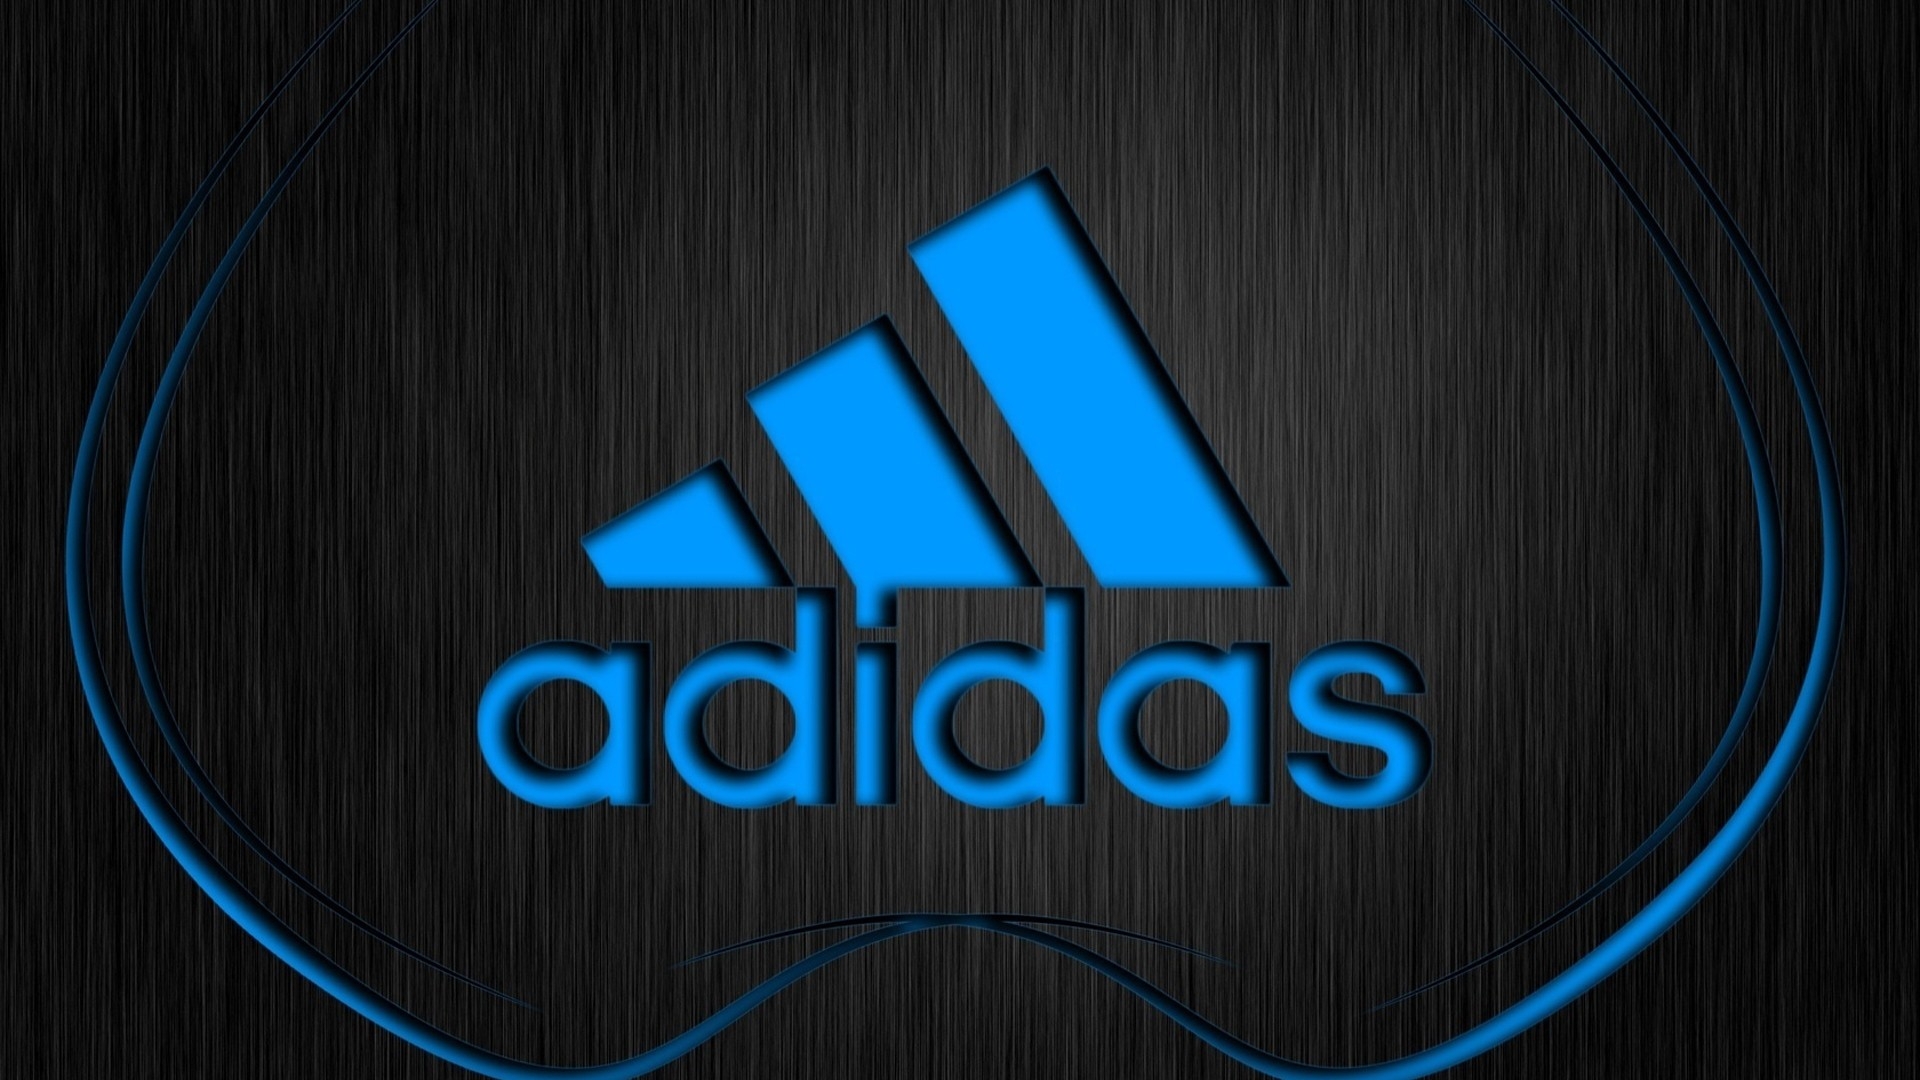 Adidas iPhone Wallpapers  Top Free Adidas iPhone Backgrounds   WallpaperAccess